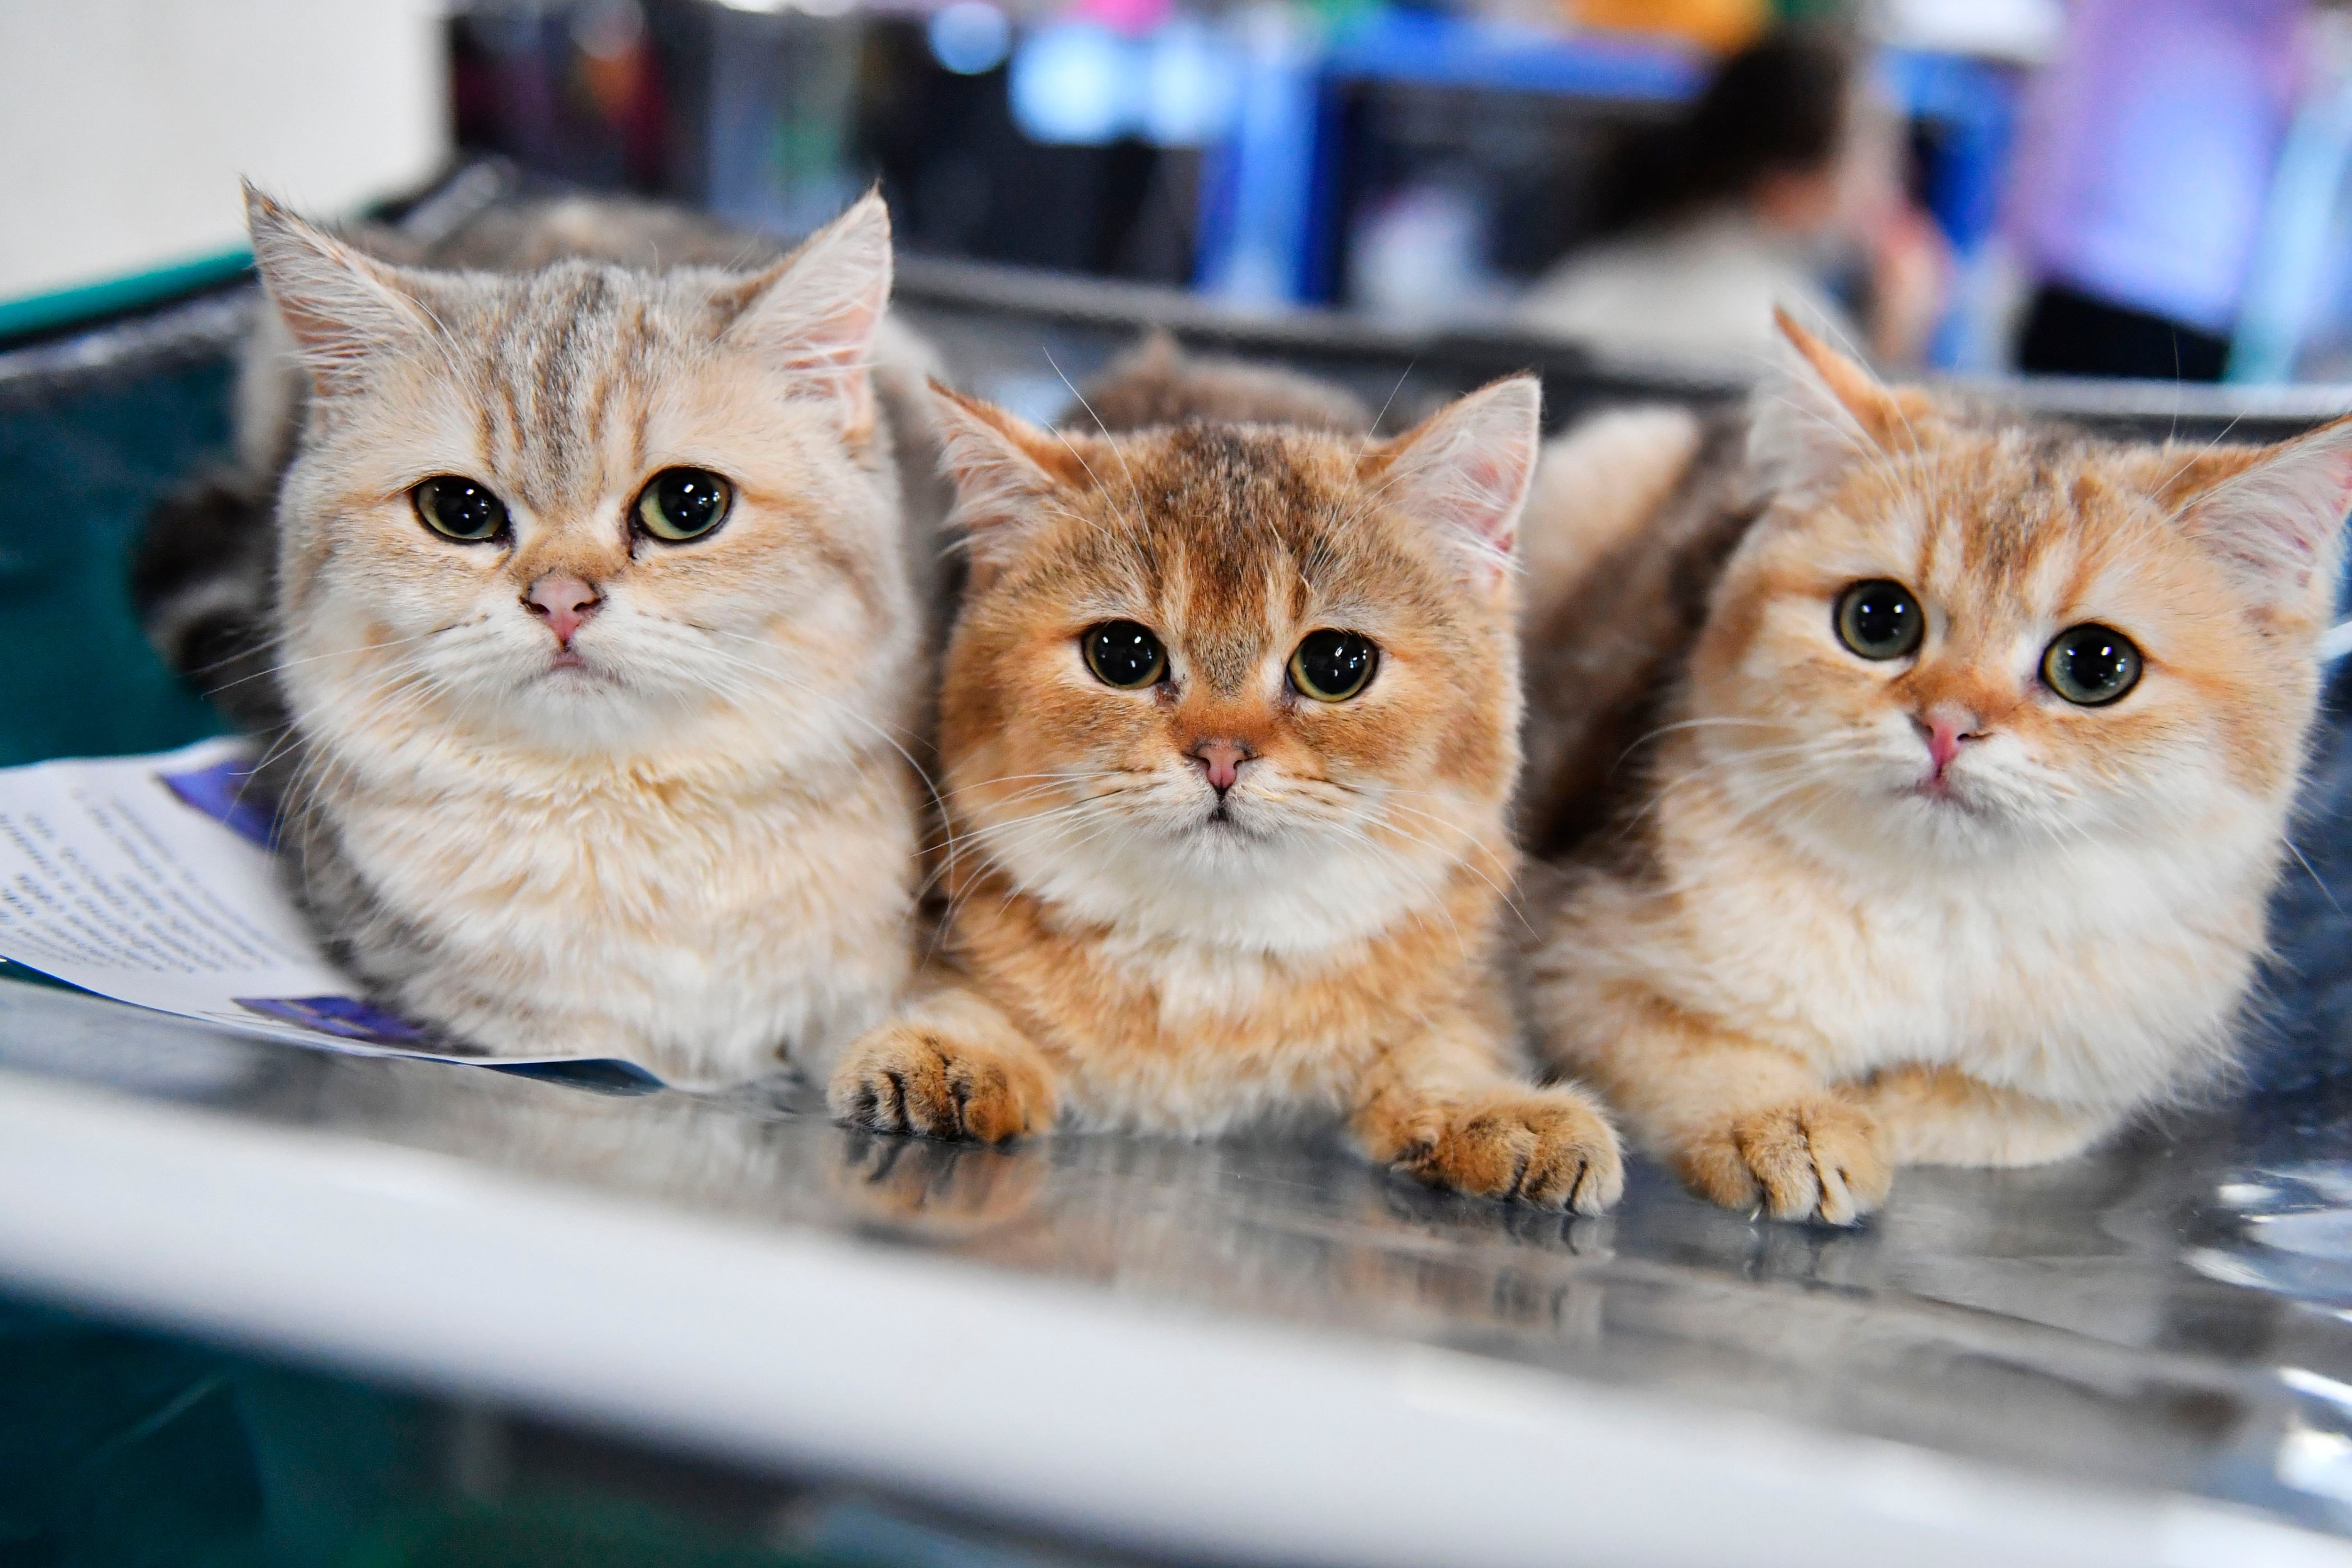 International Cat Federation bans Russian cats from competitions